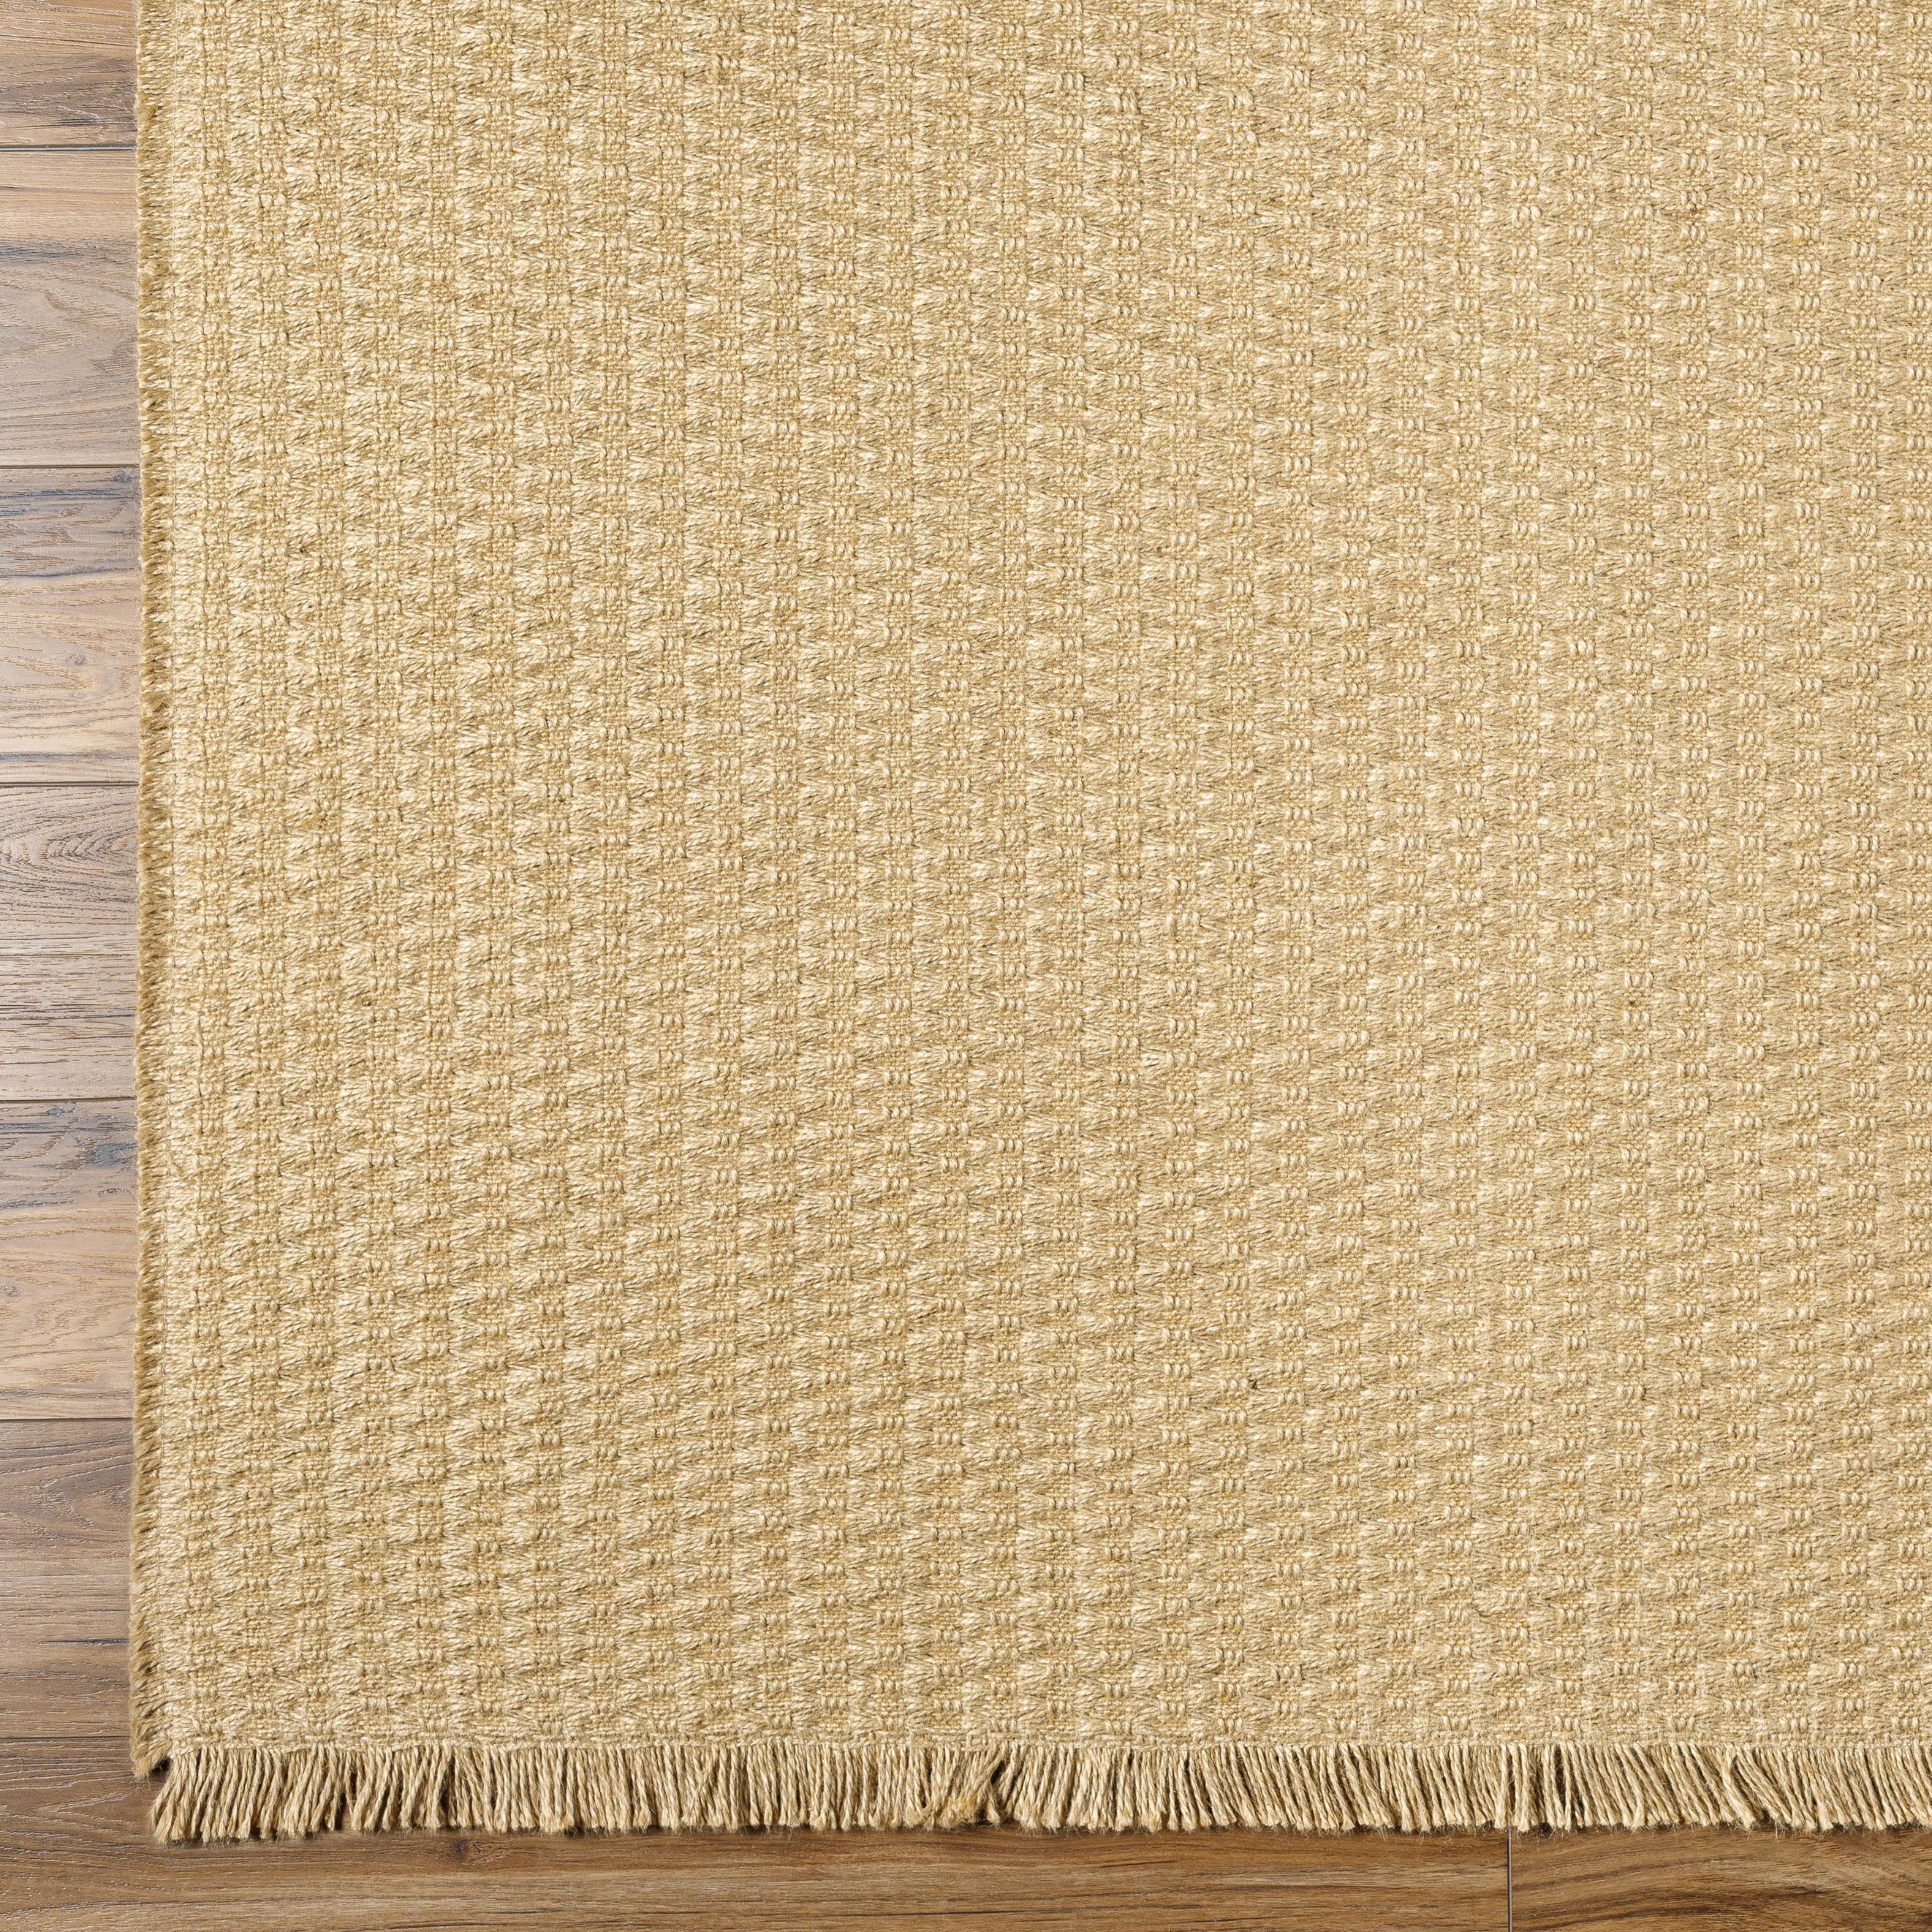 Introducing the stunning Kimi area rug – a special collaboration piece between Surya and Becki Owens. This beautiful rug is the perfect addition to any room to bring a touch of timeless elegance and style. Crafted from high-quality jute, this rug features a unique texture that adds visual interest and dimension to your space. Amethyst Home provides interior design, new home construction design consulting, vintage area rugs, and lighting in the Seattle metro area.